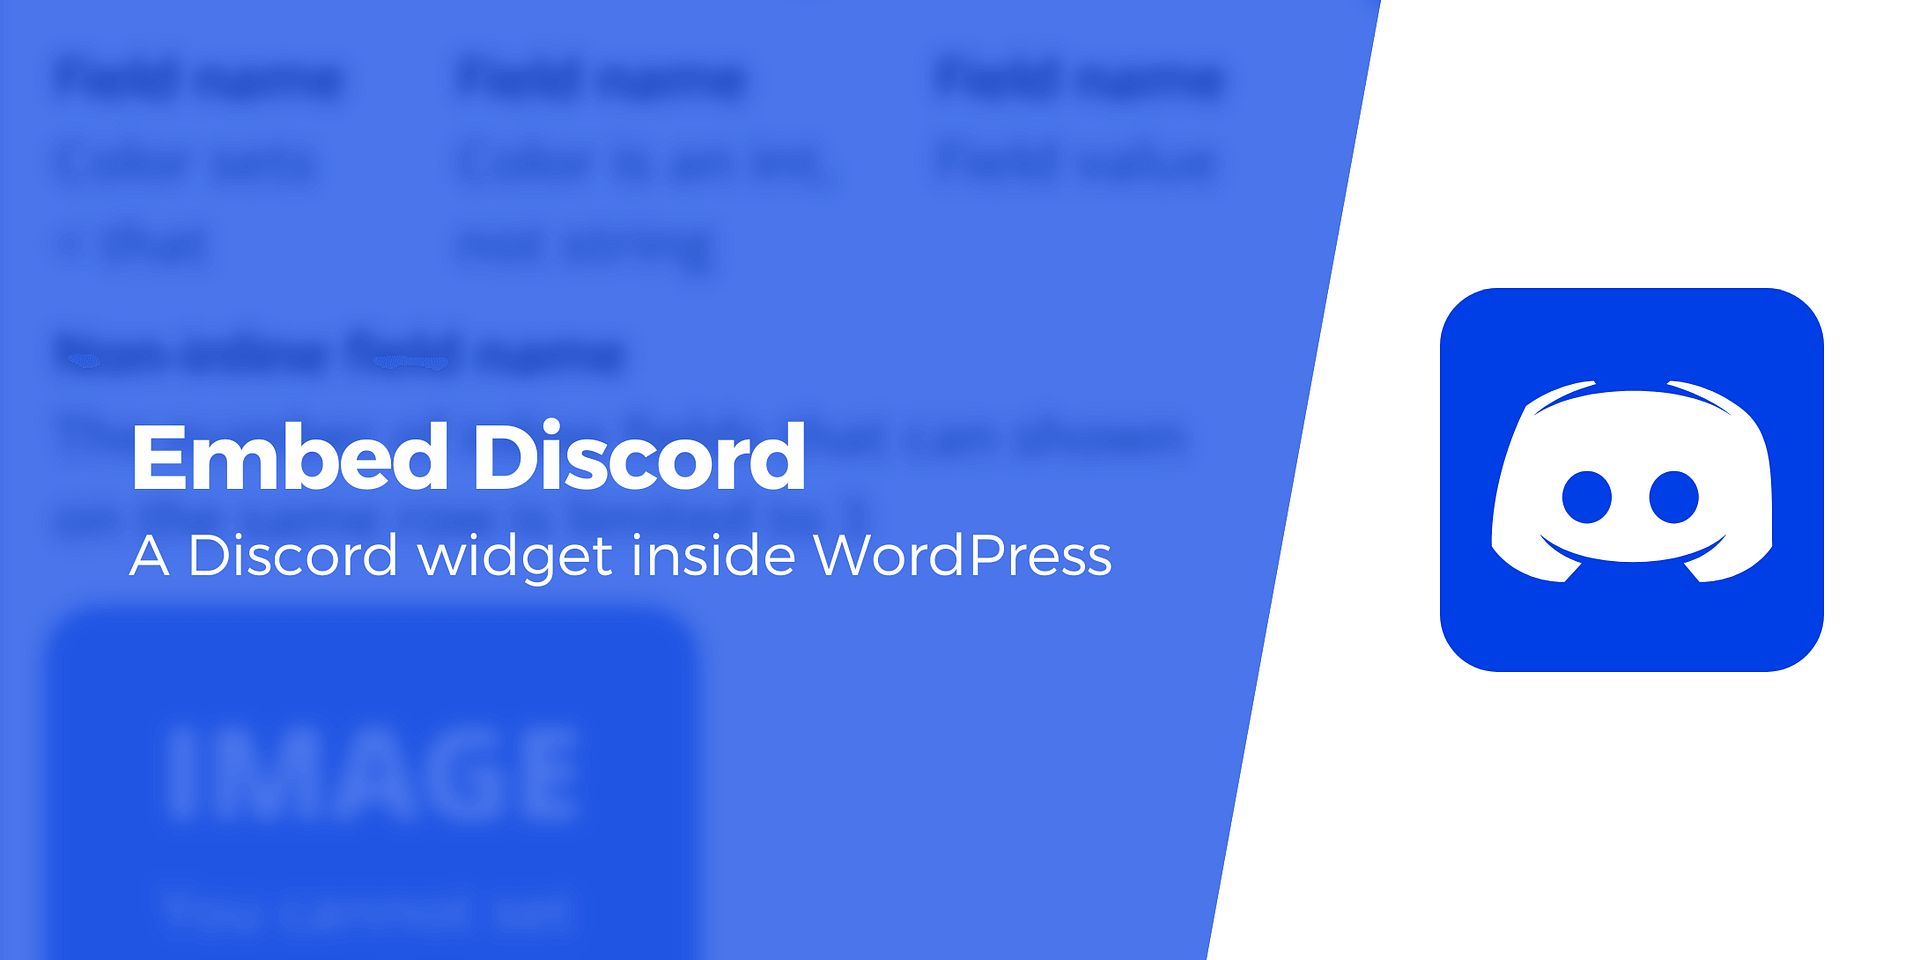 How to Embed a Discord Widget Into WordPress (In 3 Steps)